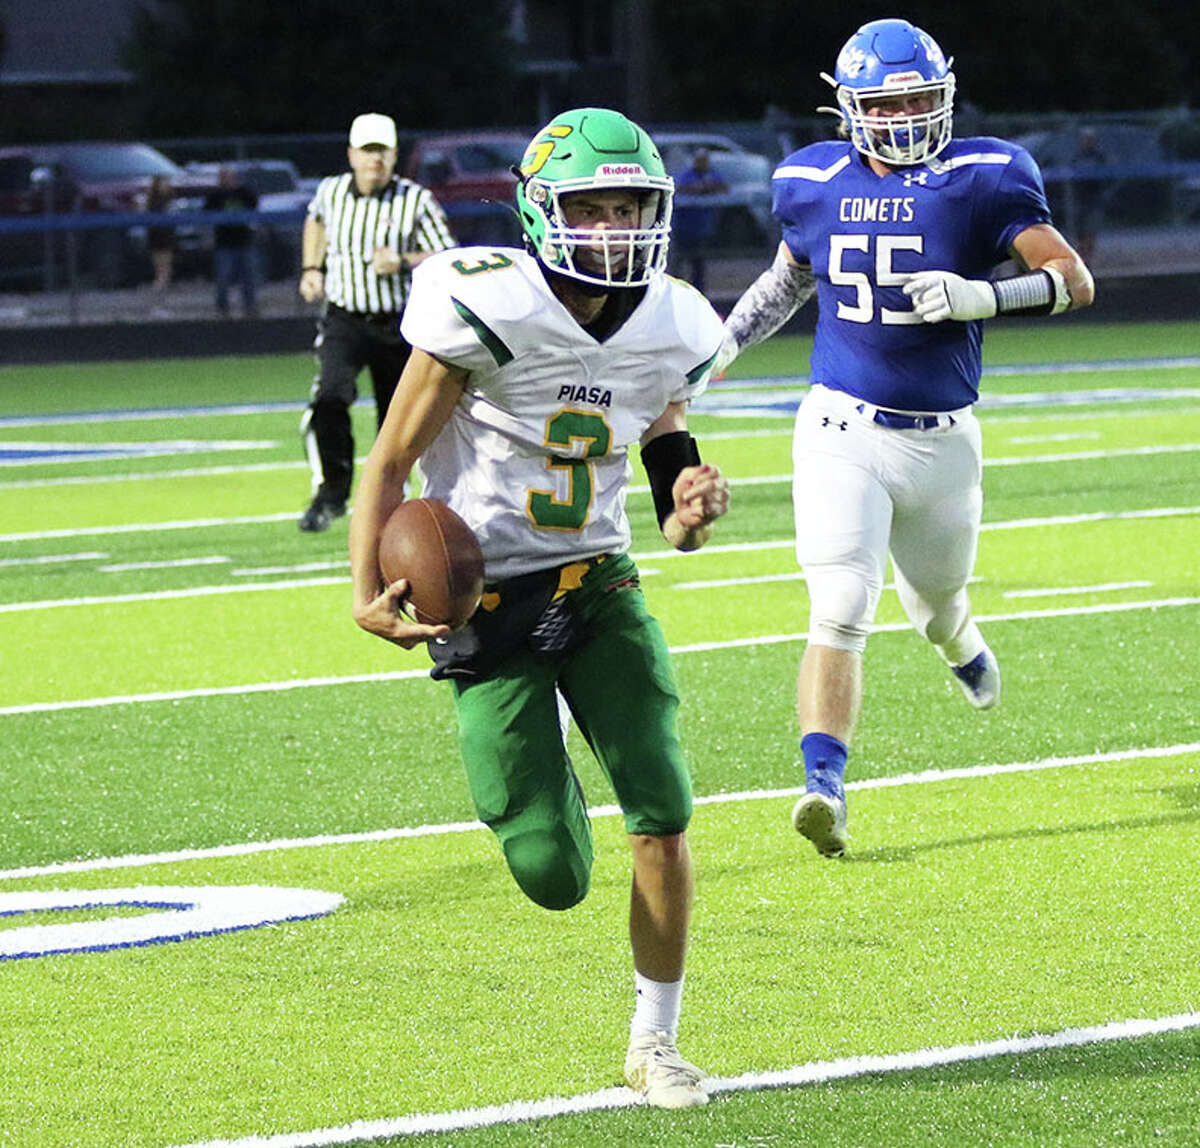 Southwestern quarterback Quinten Strohbeck (3) runs for a first down with Greenville's Sam Wagner in pursuit in the first half of a SCC game Friday night at Don Stout Field in Greenville.